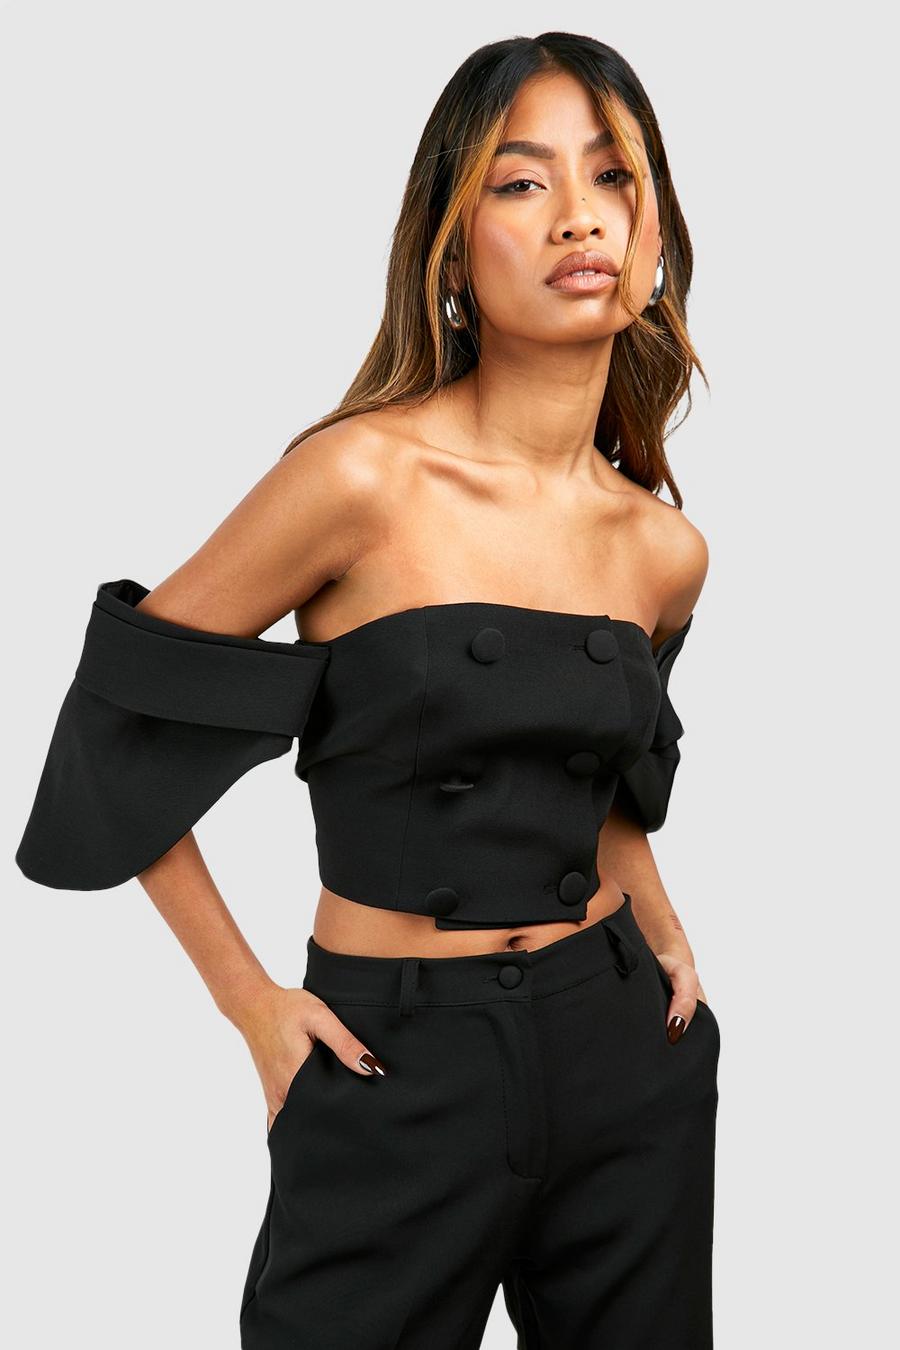 Women's Tops Summer, Women's Strapless Bandeau Top Casual Tube Top Ruched  Going Out Crop Tops Backless Shirt